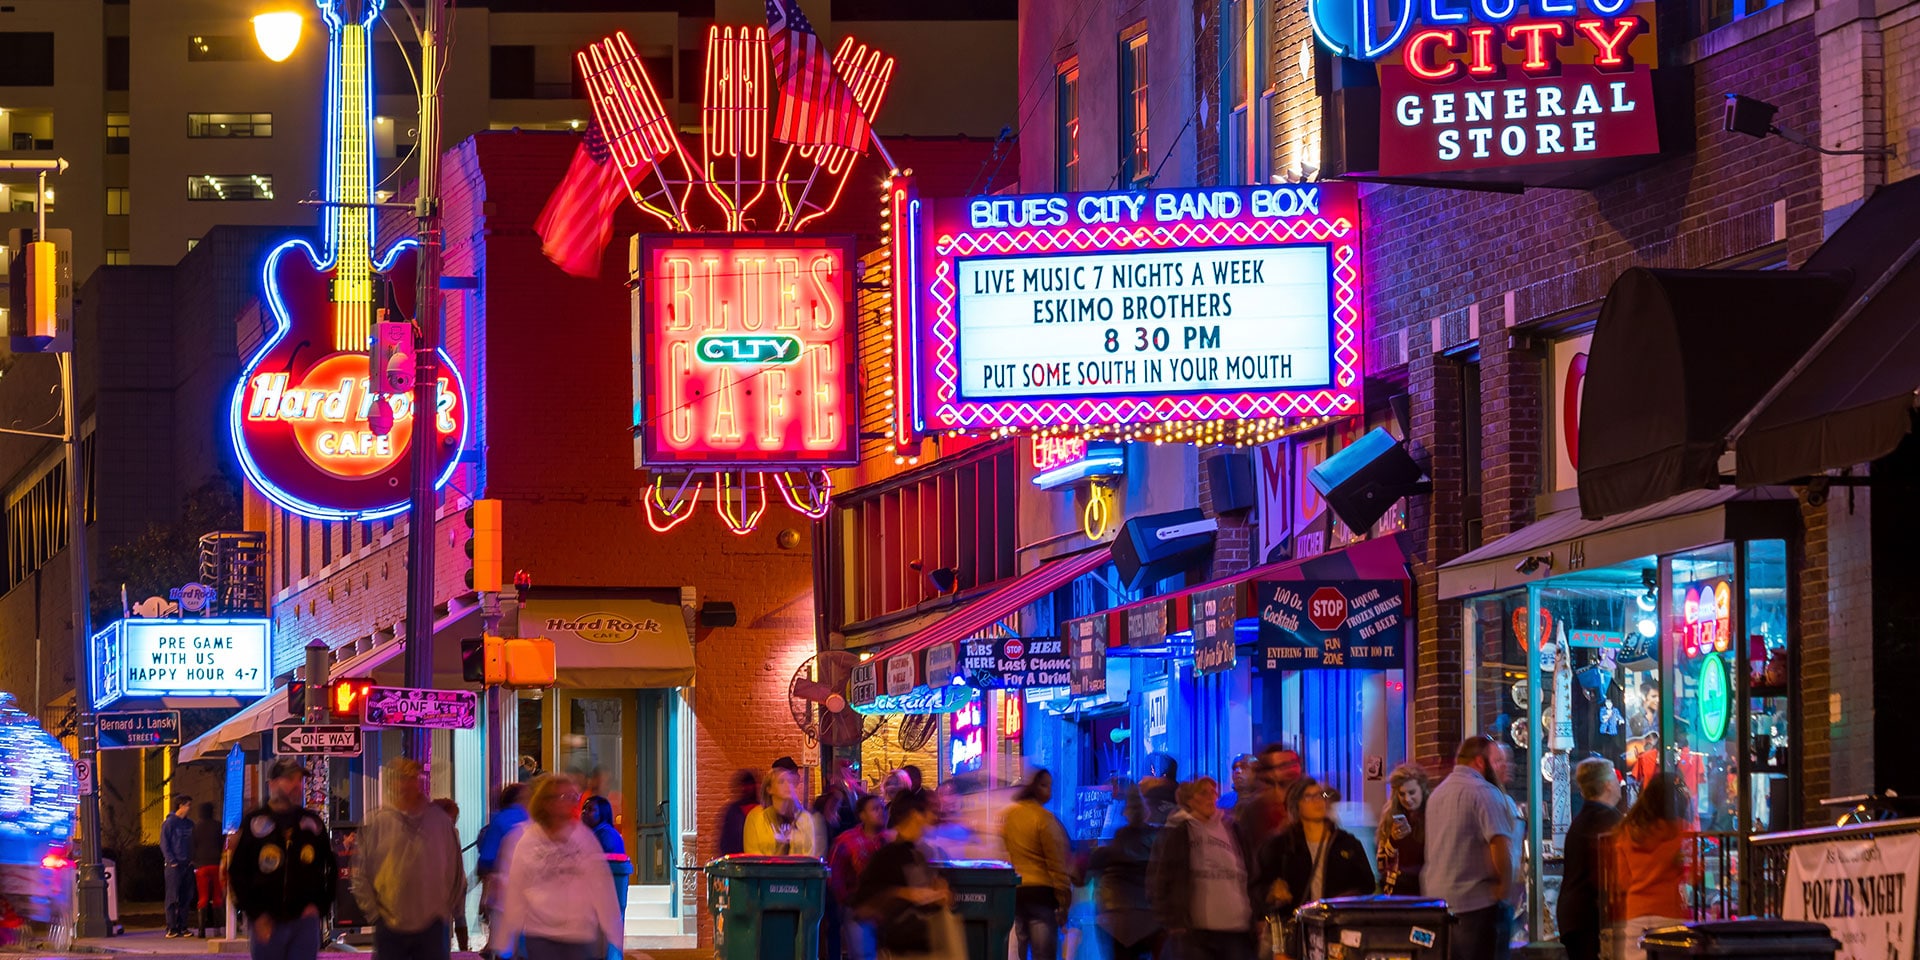 Nighttime’s the Right Time: 5 Things to Do on Beale Street After Dark